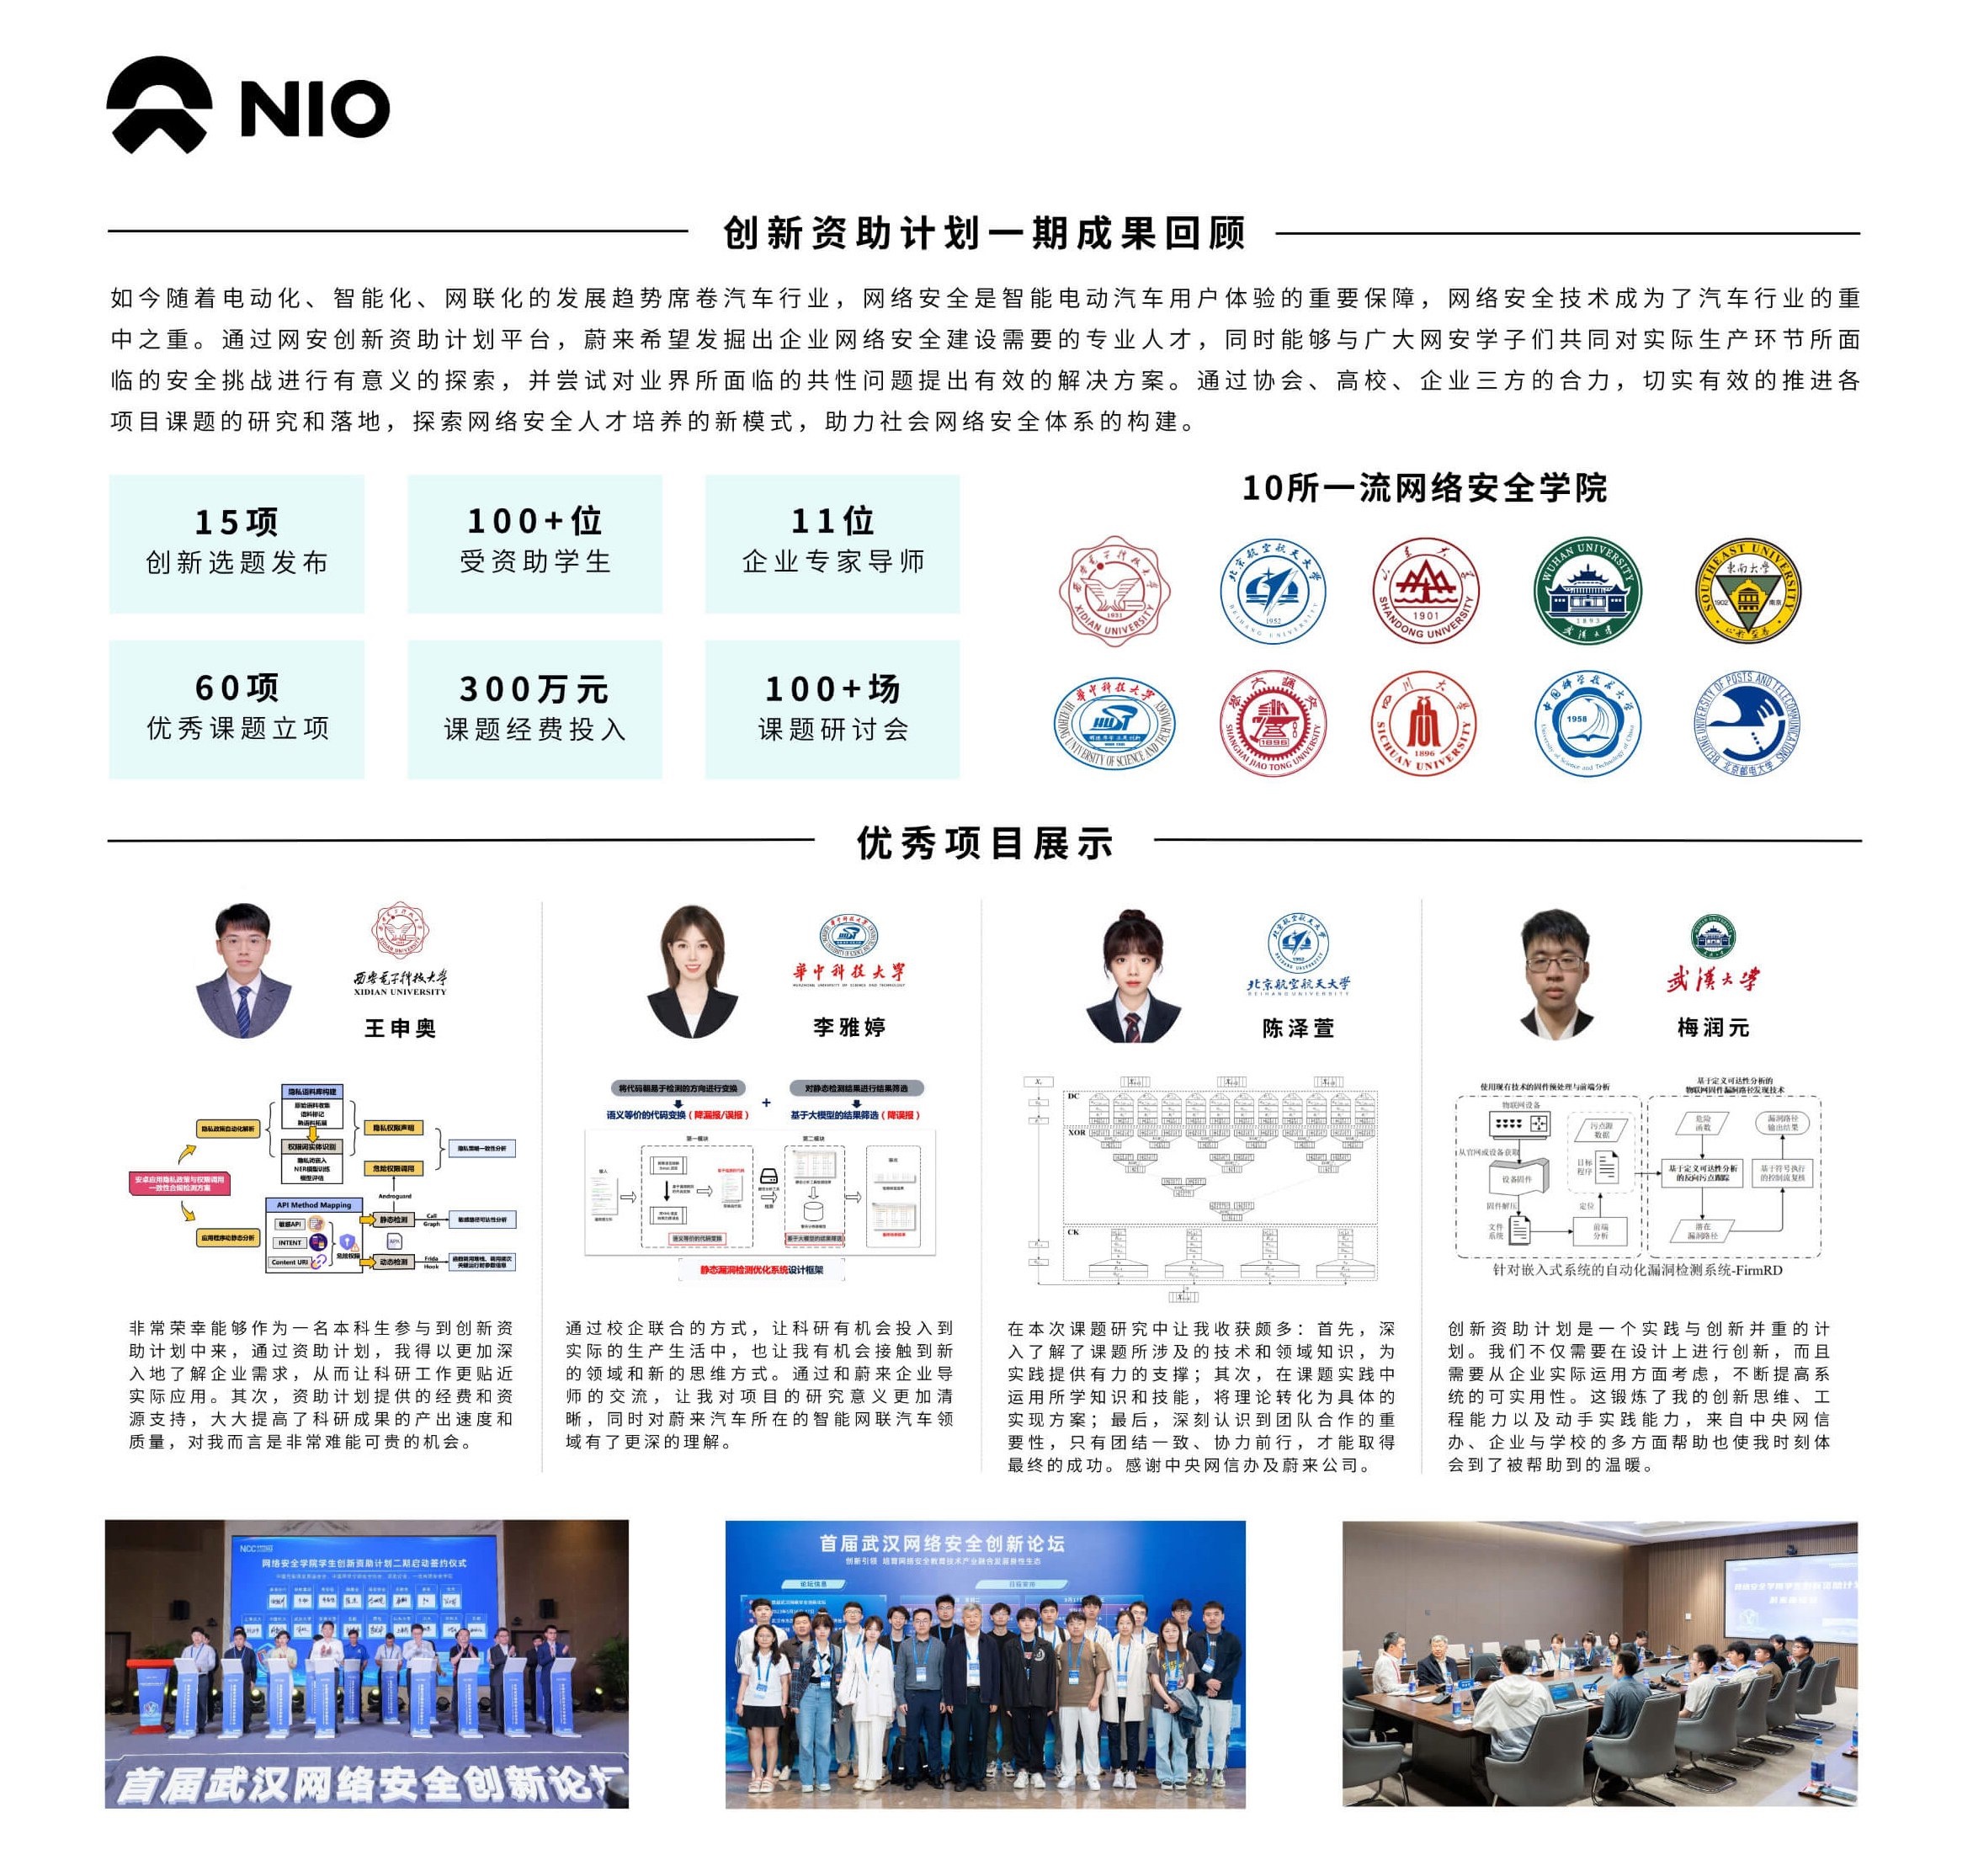 Funding-NIO-Excellent-Project